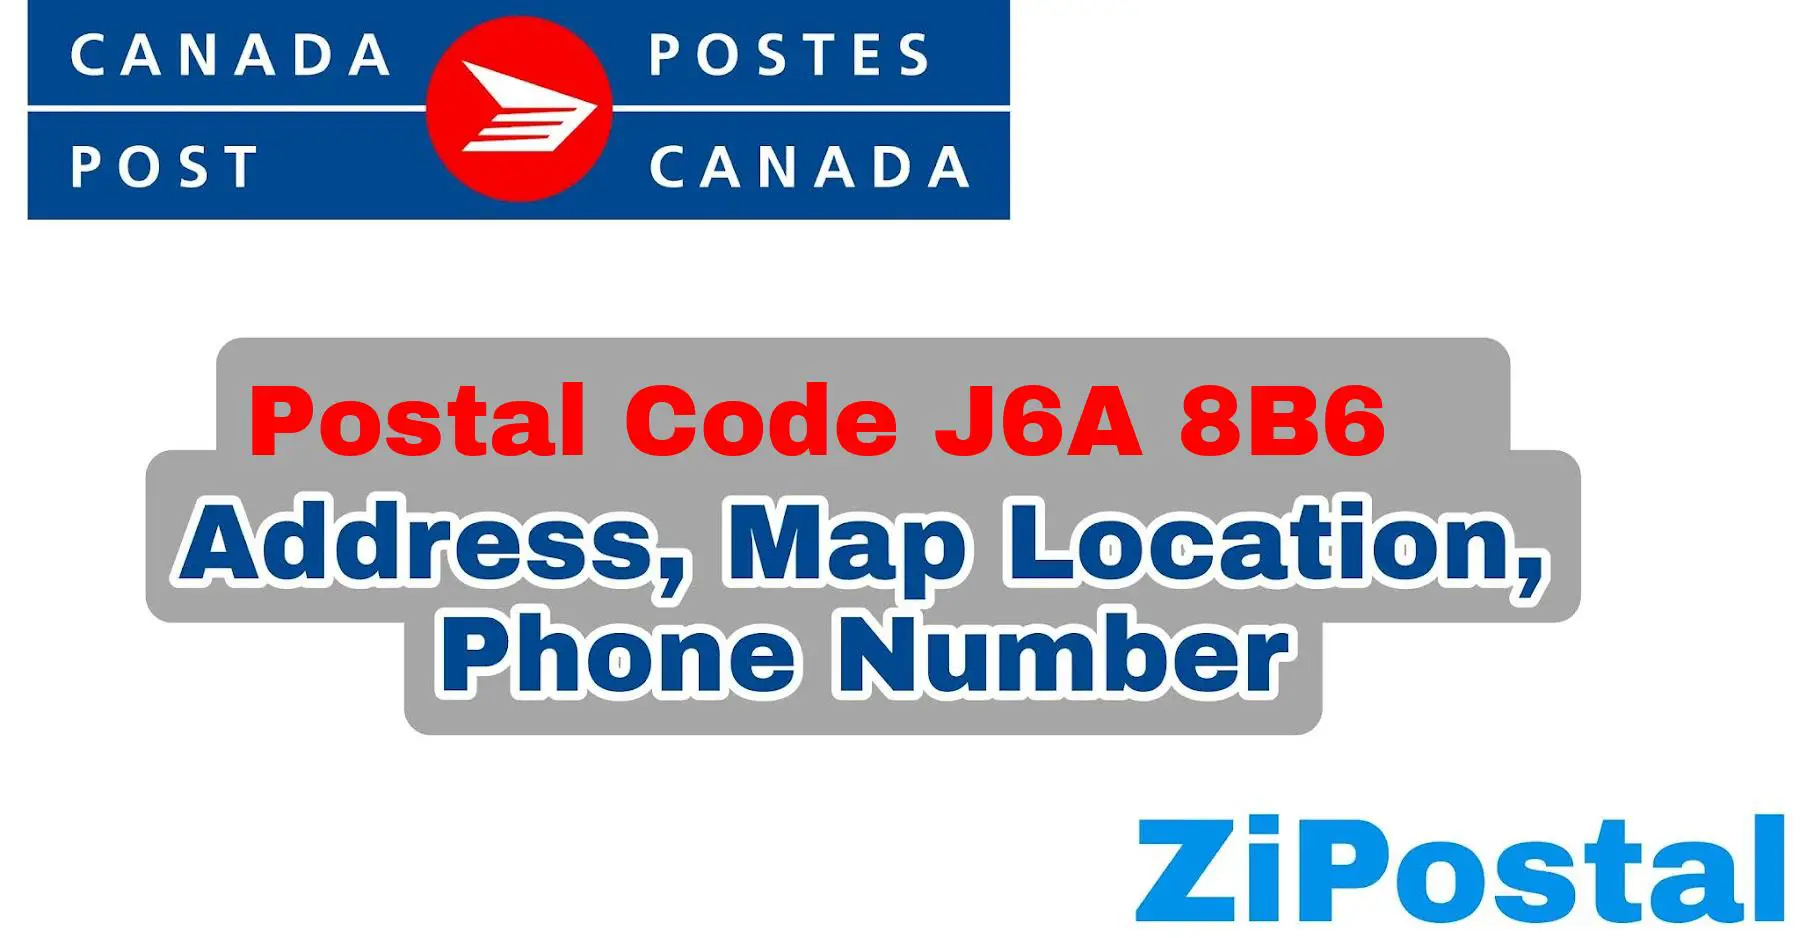 Postal Code J6A 8B6 Address Map Location and Phone Number